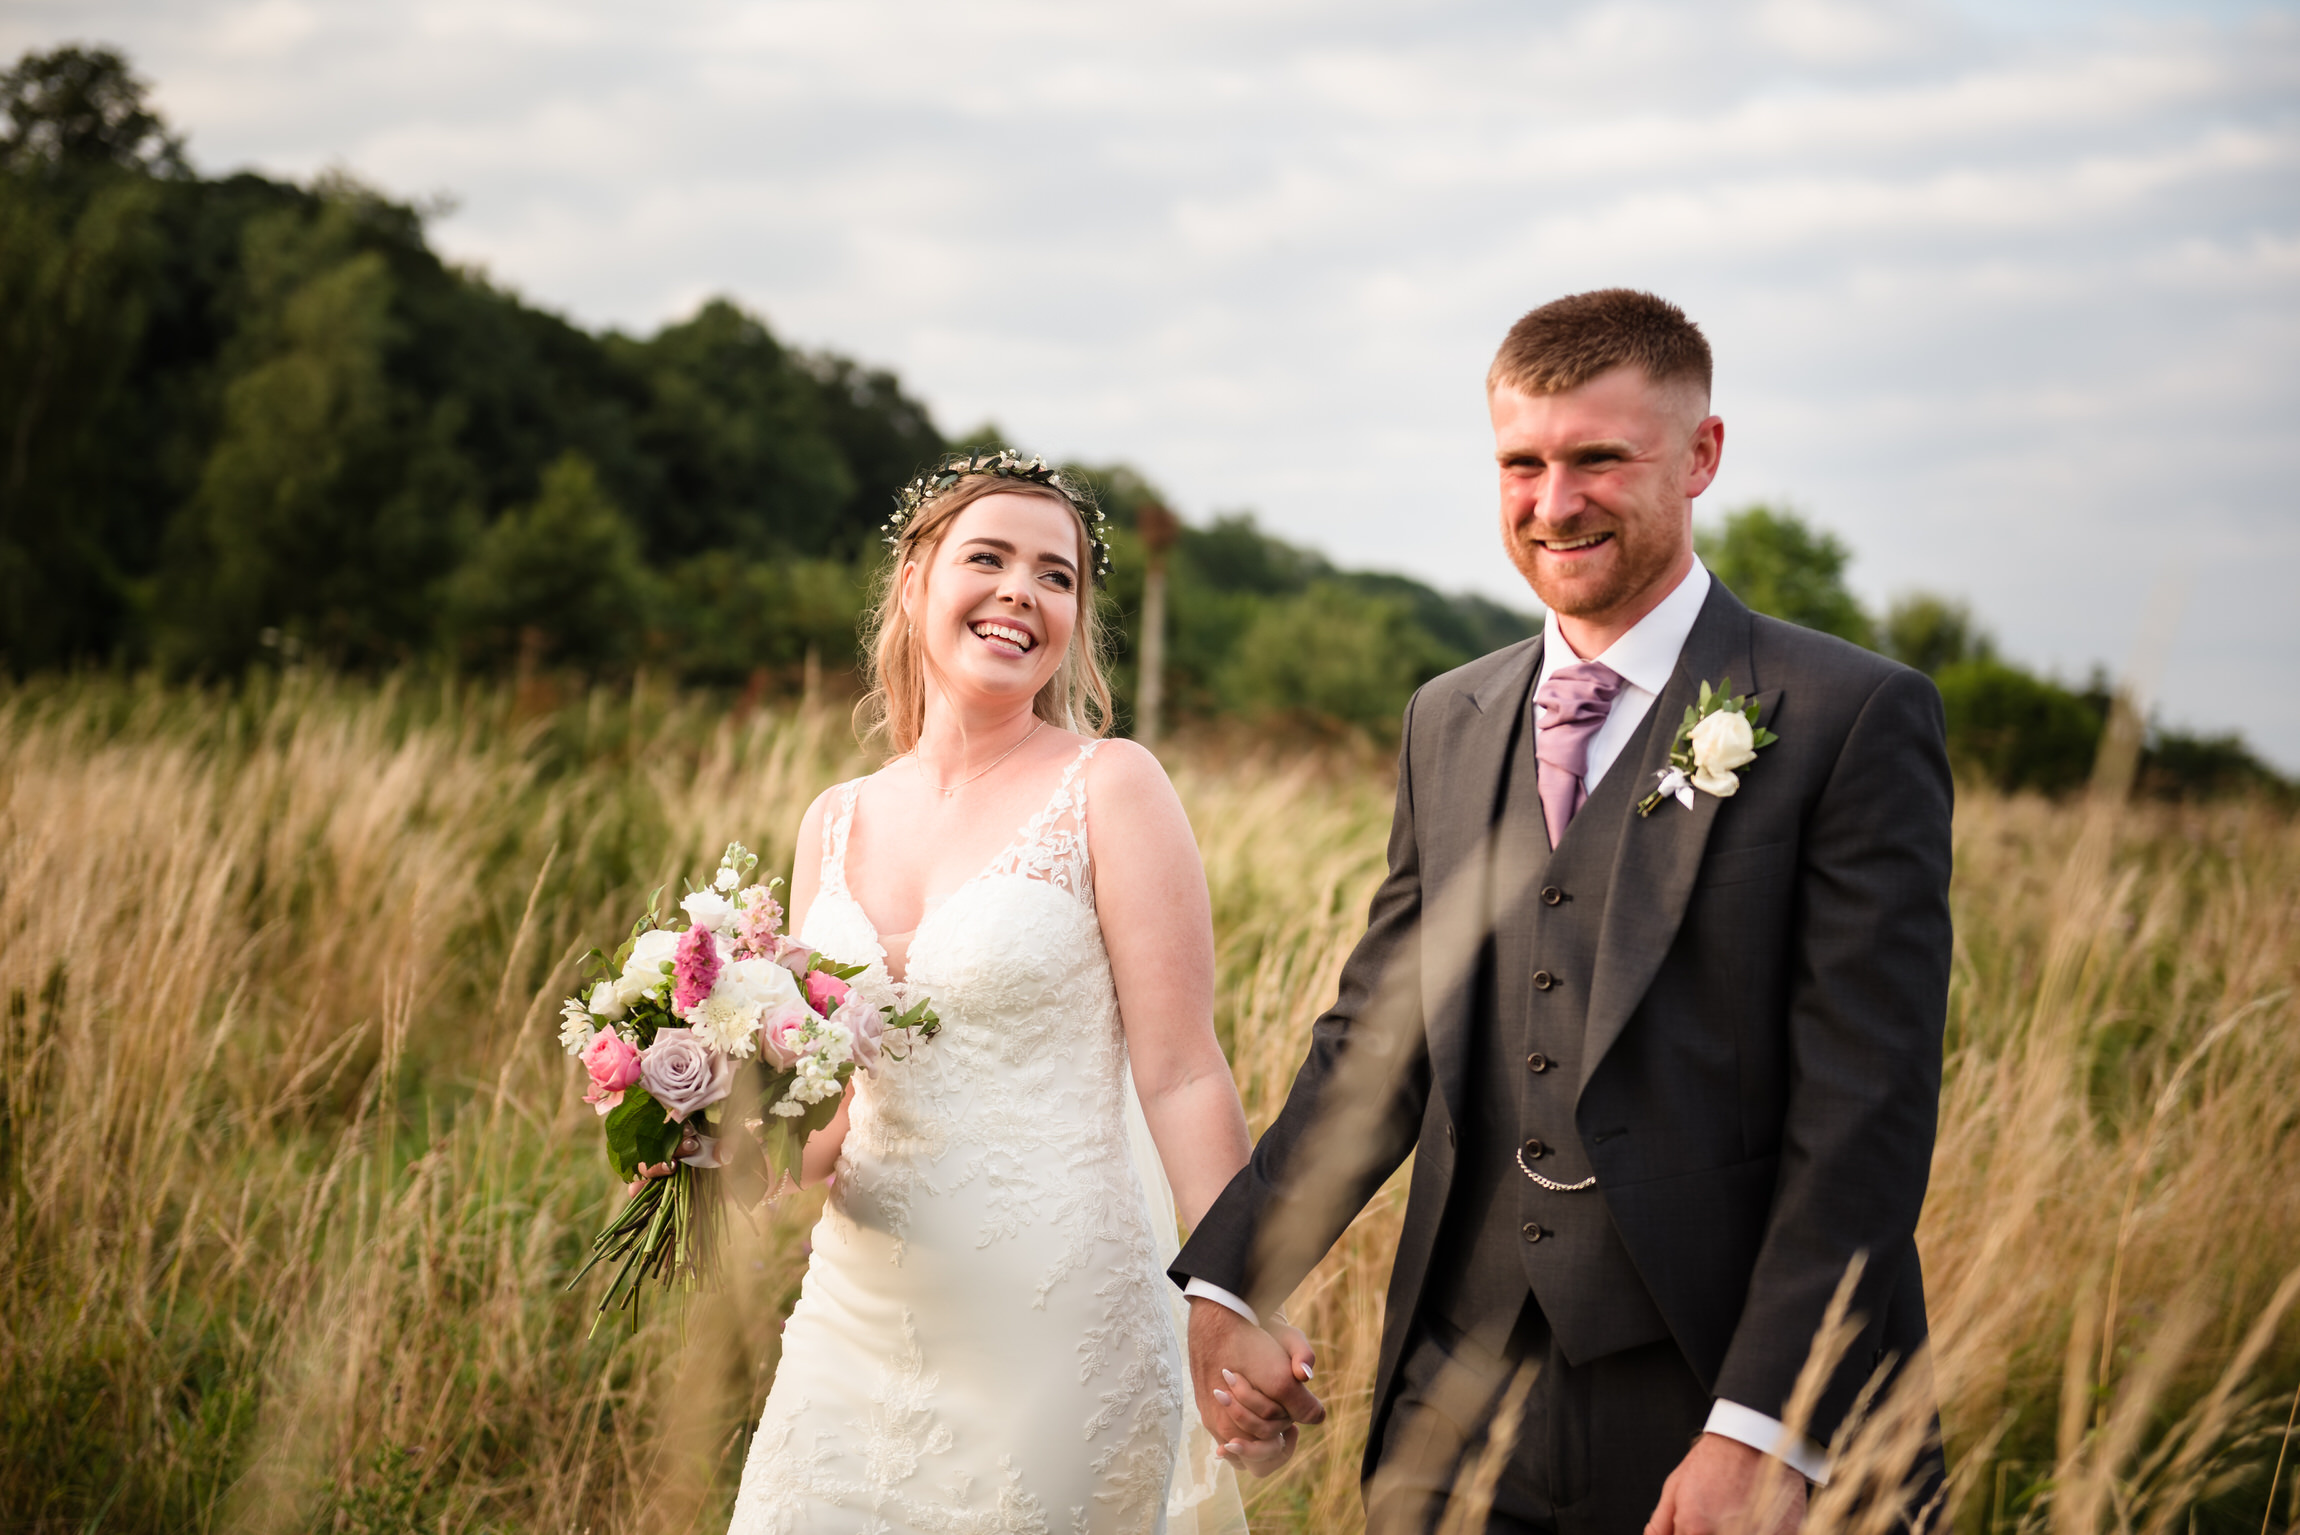 Bride and groom portraits in long grass